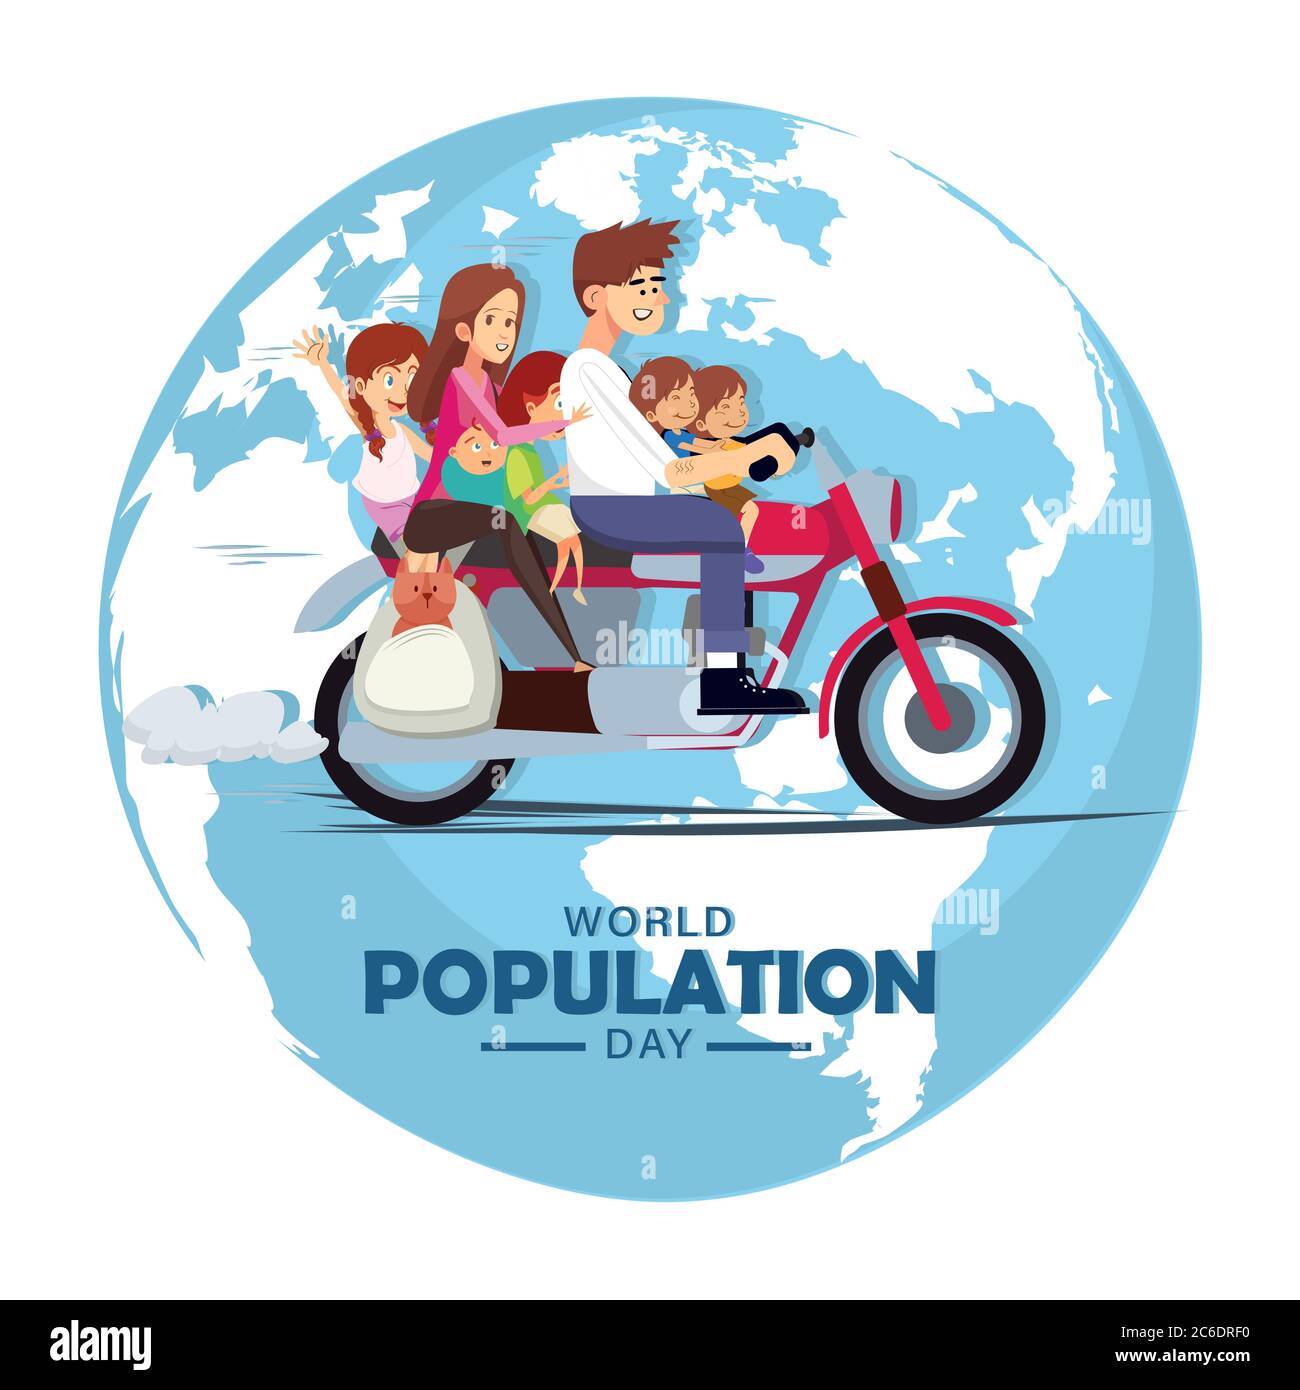 World population day, riding whole family with pet dog on a motorbike, motorcycle around the globe, poster, vector illustration Stock Vector